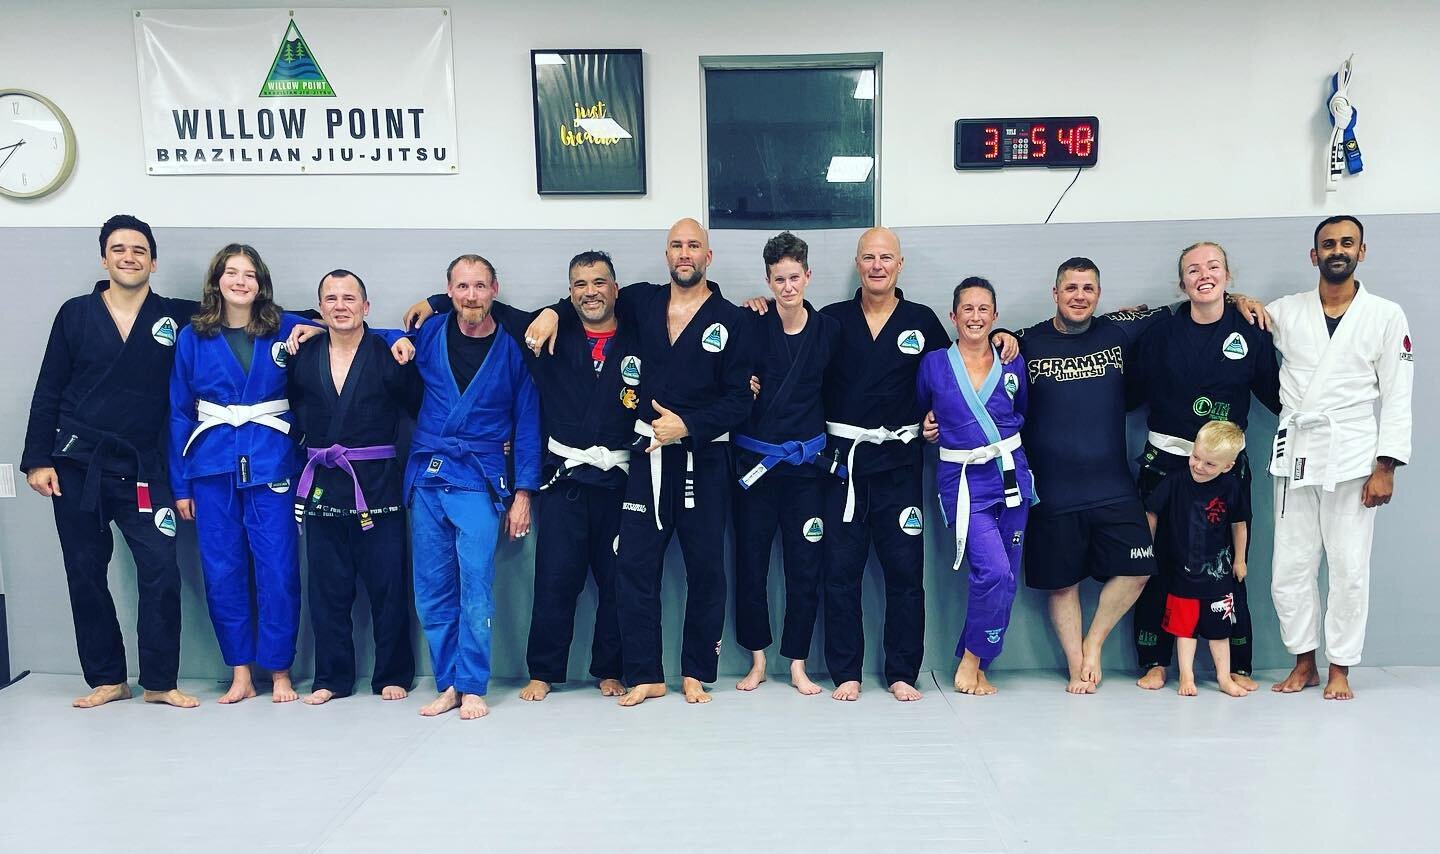 Monday night BJJ Fundamentals ✅
.
Big congratulations to @noellaq.44 and @ankithshetty91 on receiving their 1st and 3rd stripe respectively👏🏼 
.
#willowpointbjj #willowpoint #bjj #campbellriver #brazilianjiujitsu #blackbelt #oss #promotions